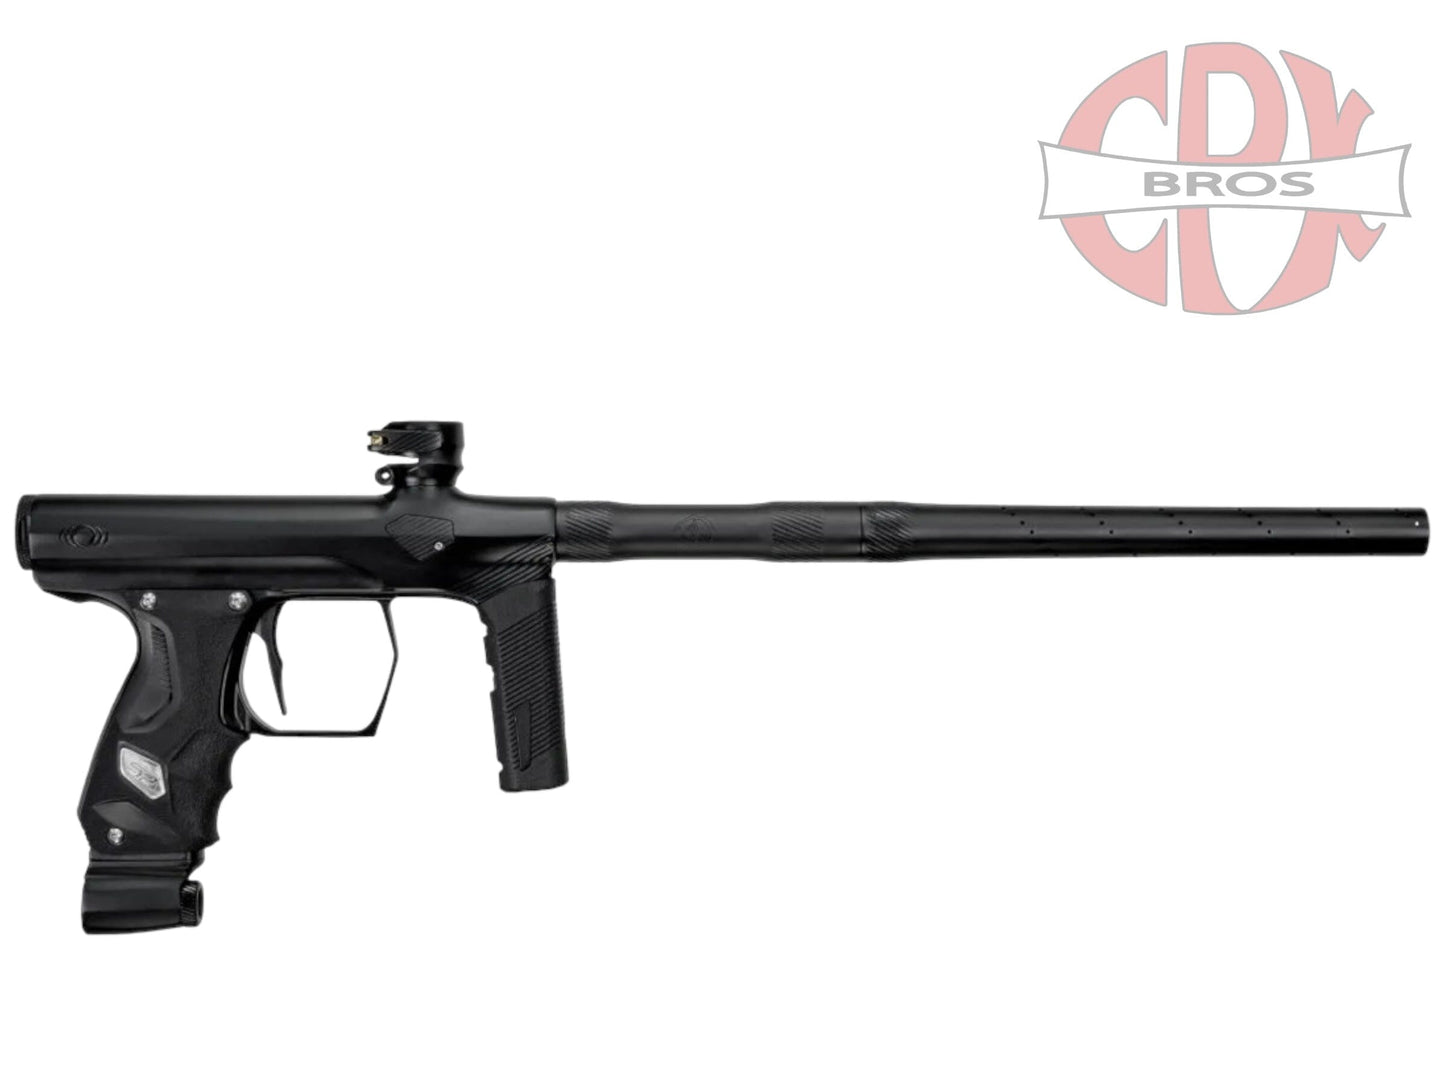 Used PRE-ORDER OF $994.95 SP Shocker ERA Paintball Gun - Matte Black Paintball Gun from CPXBrosPaintball Buy/Sell/Trade Paintball Markers, Paintball Hoppers, Paintball Masks, and Hormesis Headbands